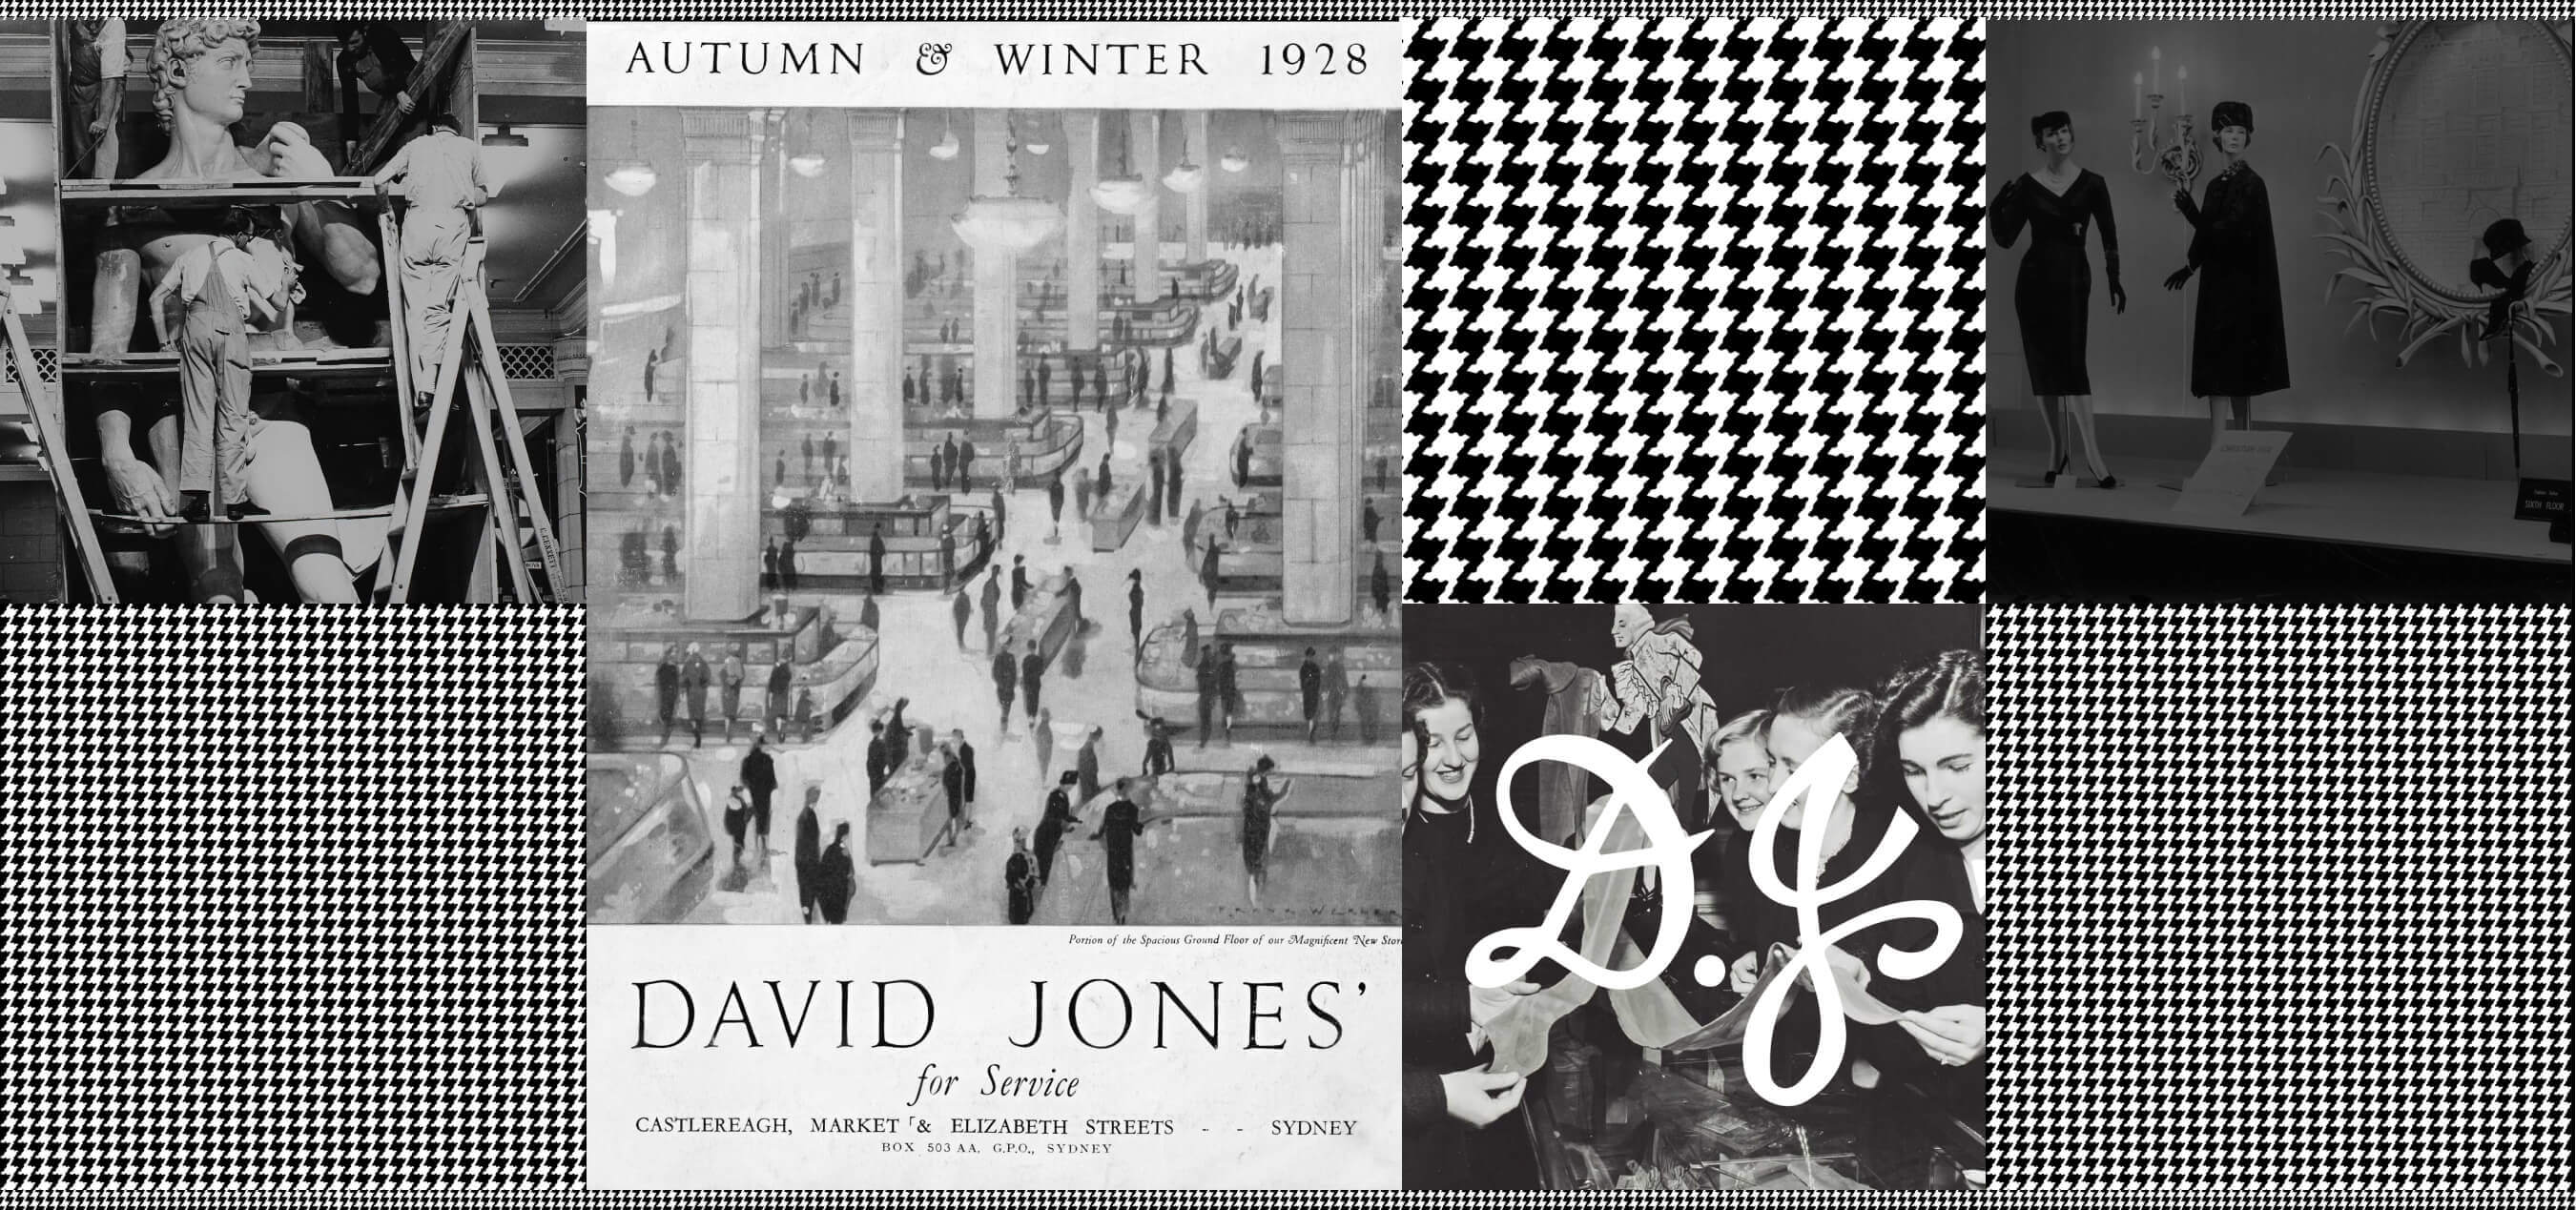 About Us: The History of David Jones